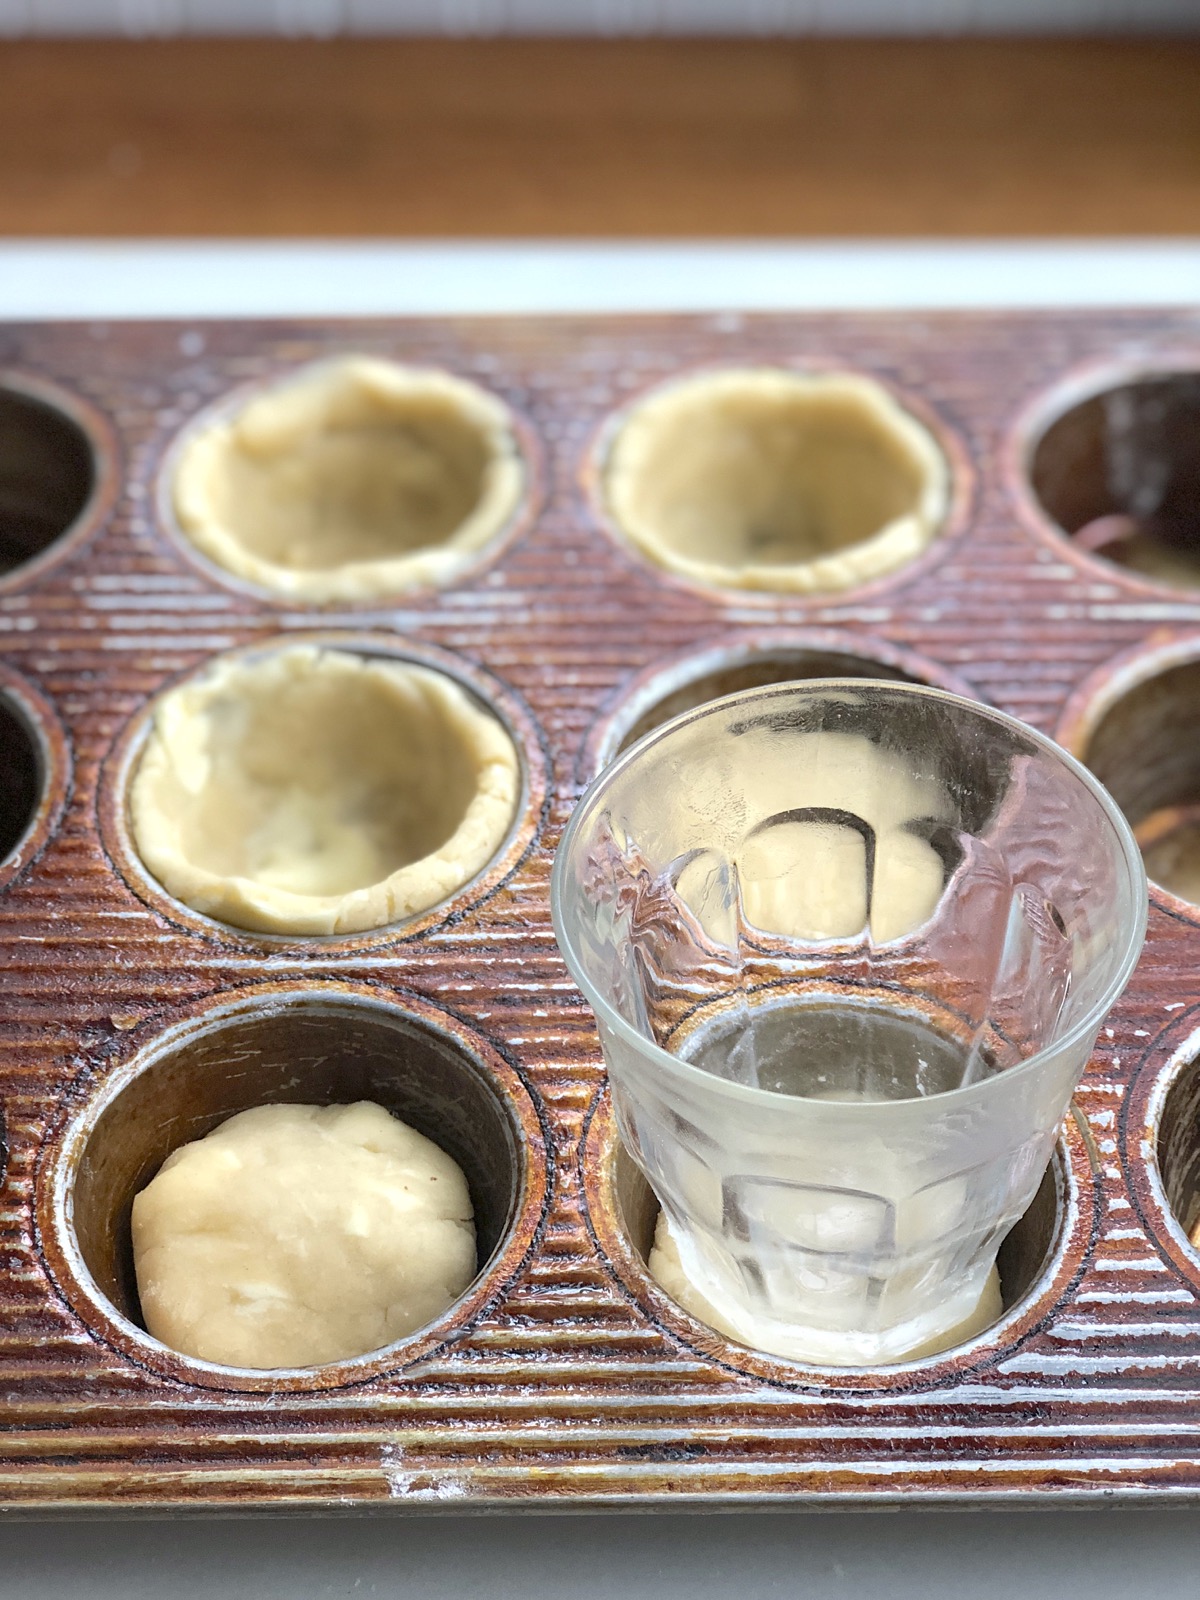 Mini pie crusts being pressed into the wells of a muffin pan using a drinking glass.